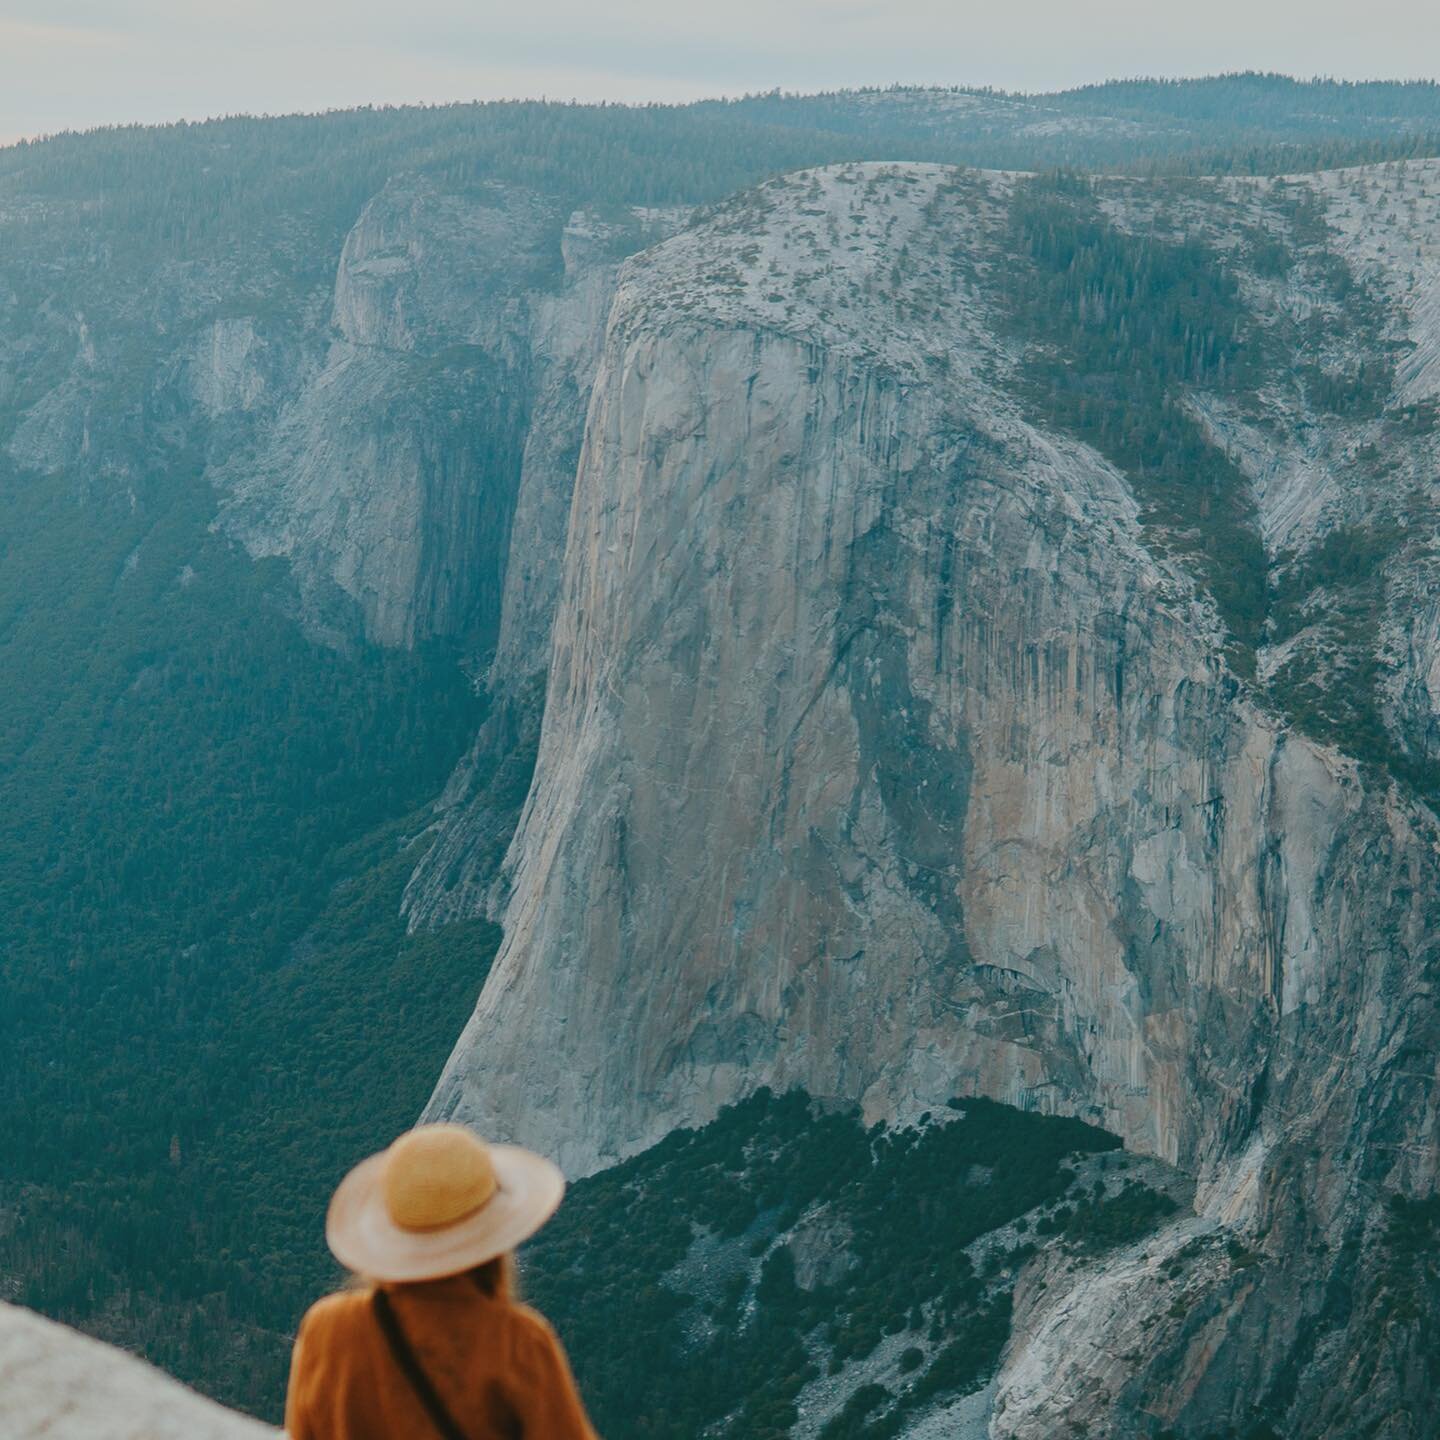 this is possibly one of my favorite photos of all time at one of my favorite viewpoints of all time! being on top of yosemite was honestly something these pictures could never capture. standing 3500 ft above yosemite valley and seeing el cap from abo